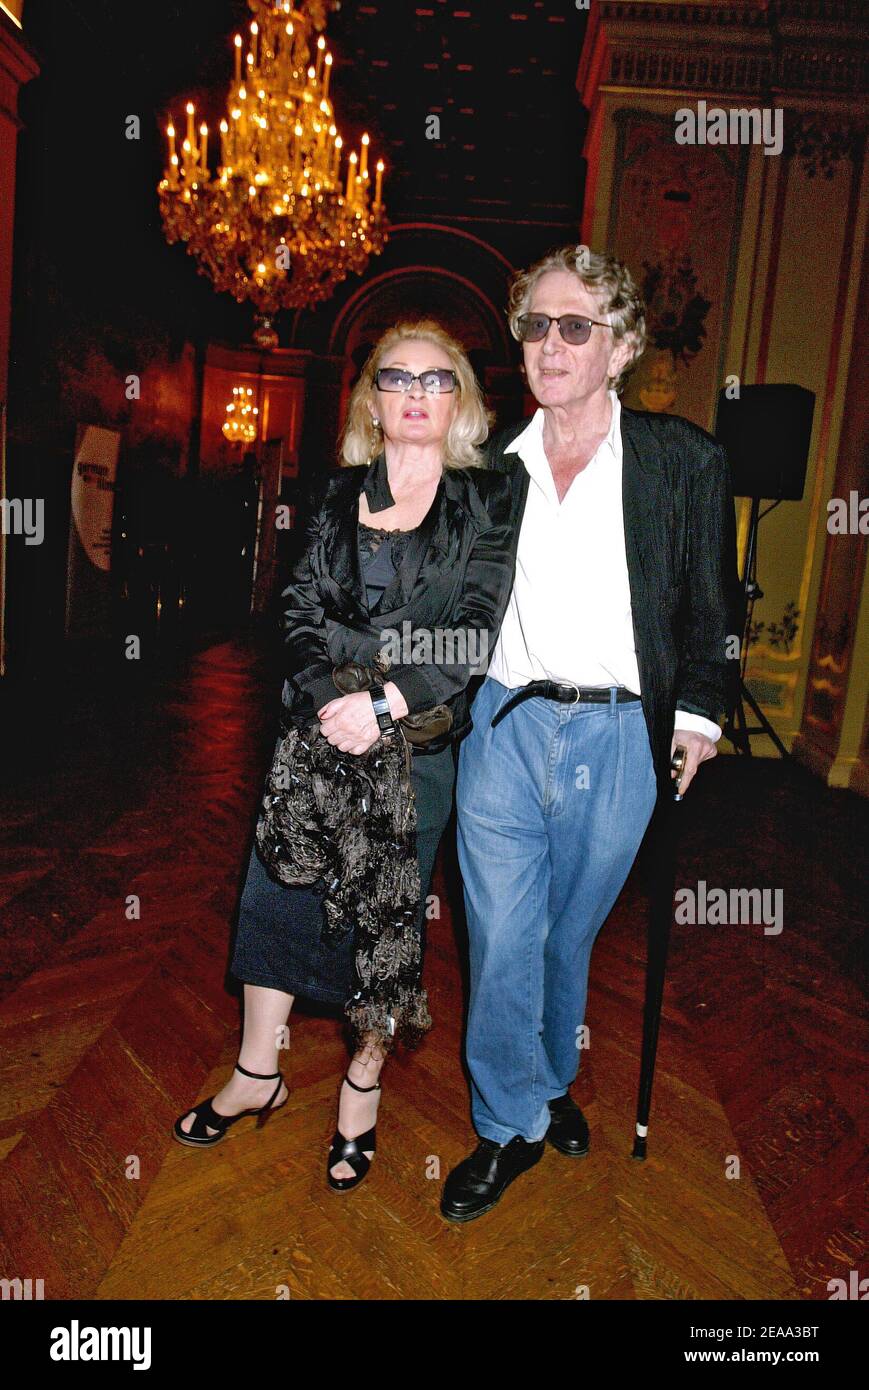 German singer Ingrid Caven and French author Jean-Jacques Schuhl attend the  opening party of German film festival held at the Hotel de Ville in Paris,  France on october 12, 2005. Photo by